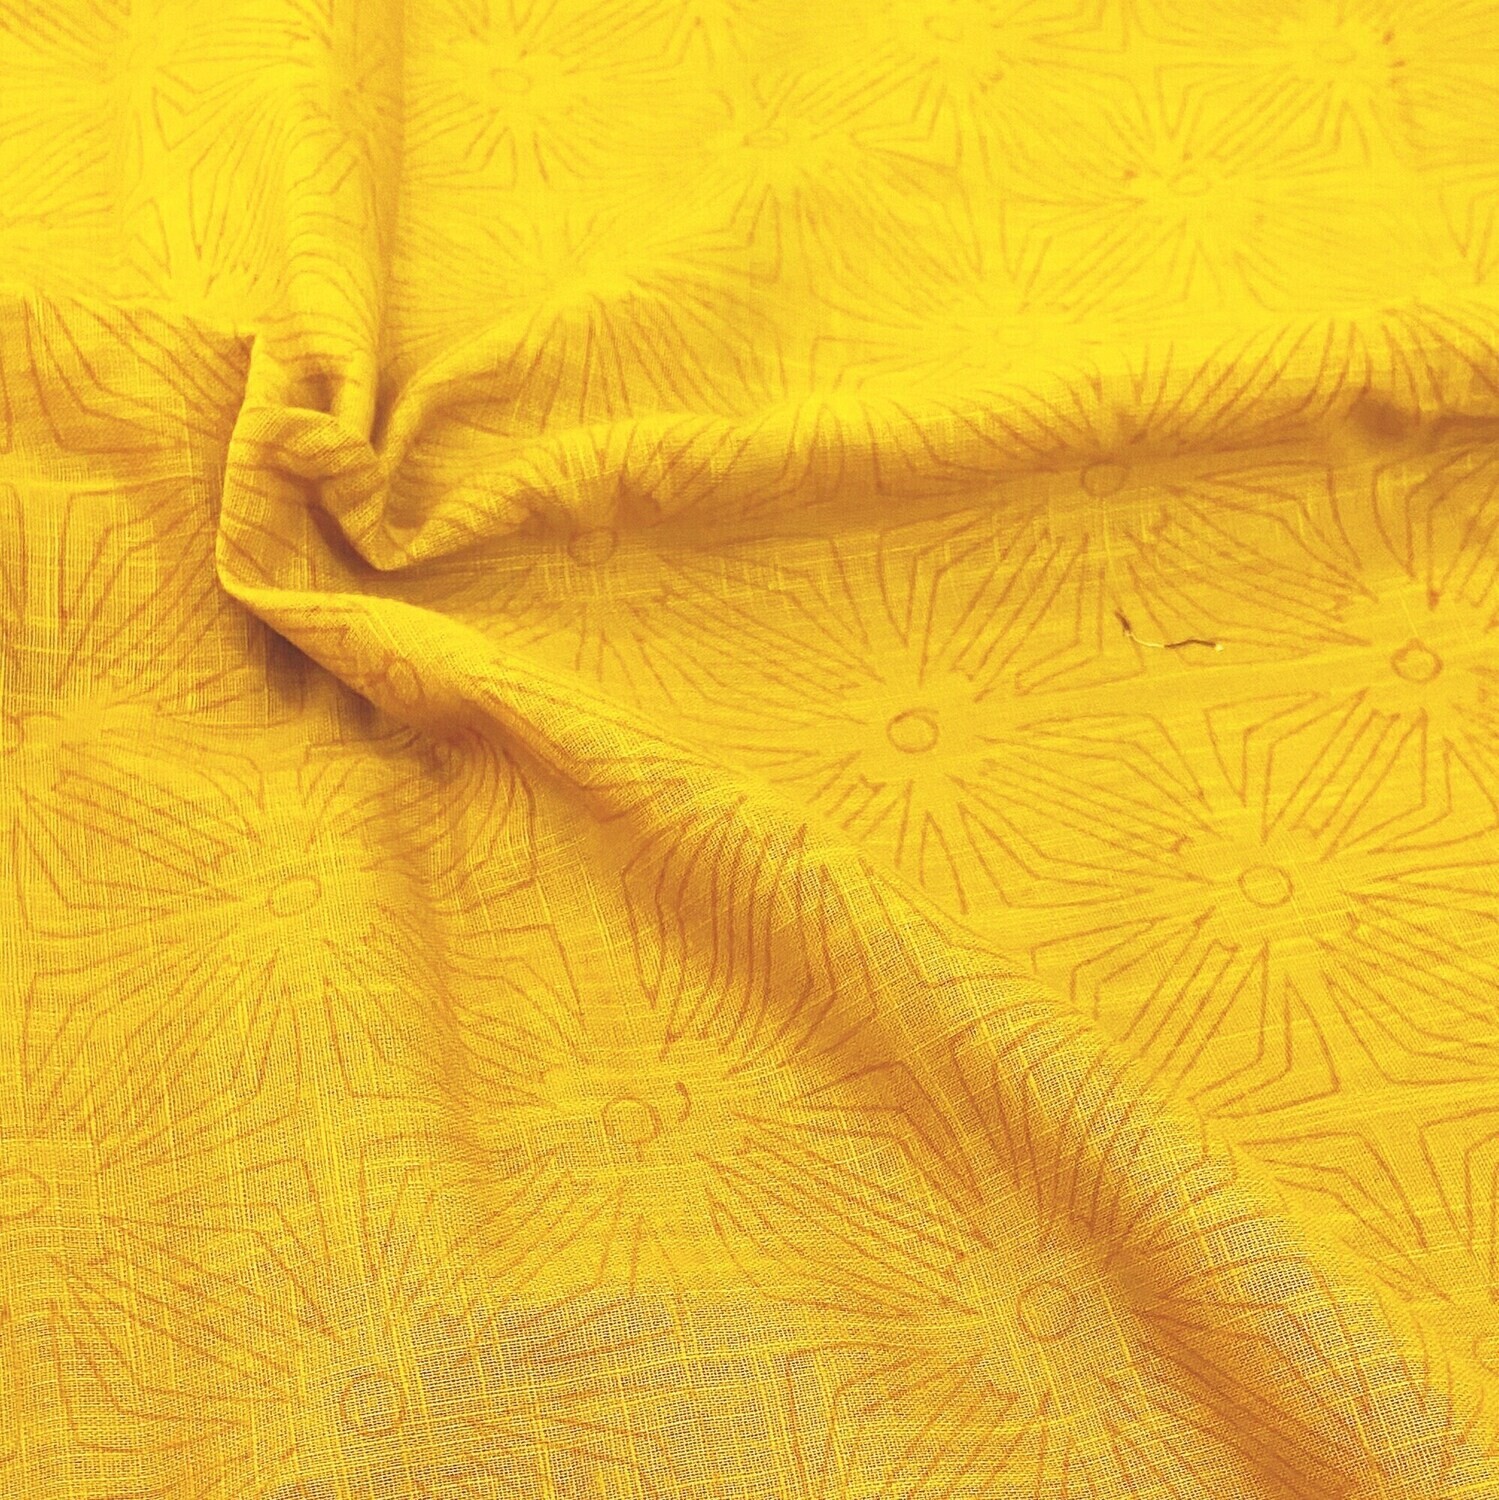 Slub Cotton Indian Fabric, Dark Mustard Self Printed Textured Cotton Fabrics, Sewing Quilting Crafting , 44 Inch Wide, Sold by Half Yard